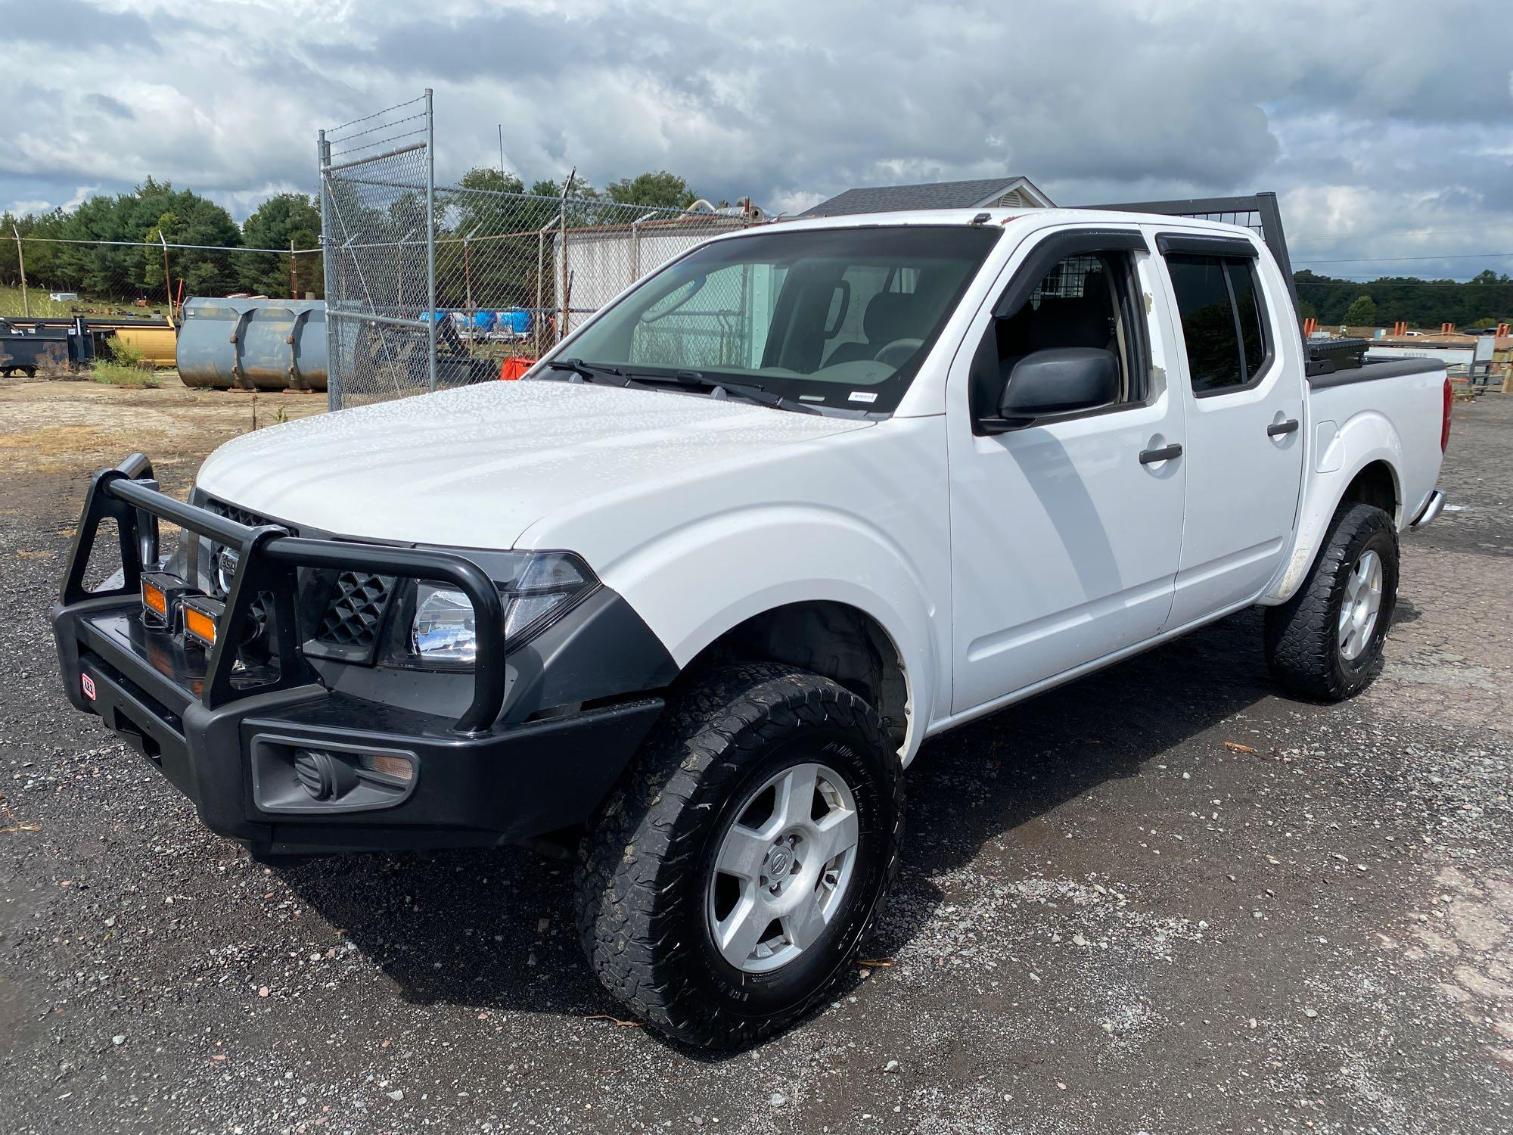 Image for 2005 Nissan Frontier 4x4 Pickup Truck 4 Dr. Crew Cab VIN: 1N6A07WX5C447571 MILEAGE:  181,014